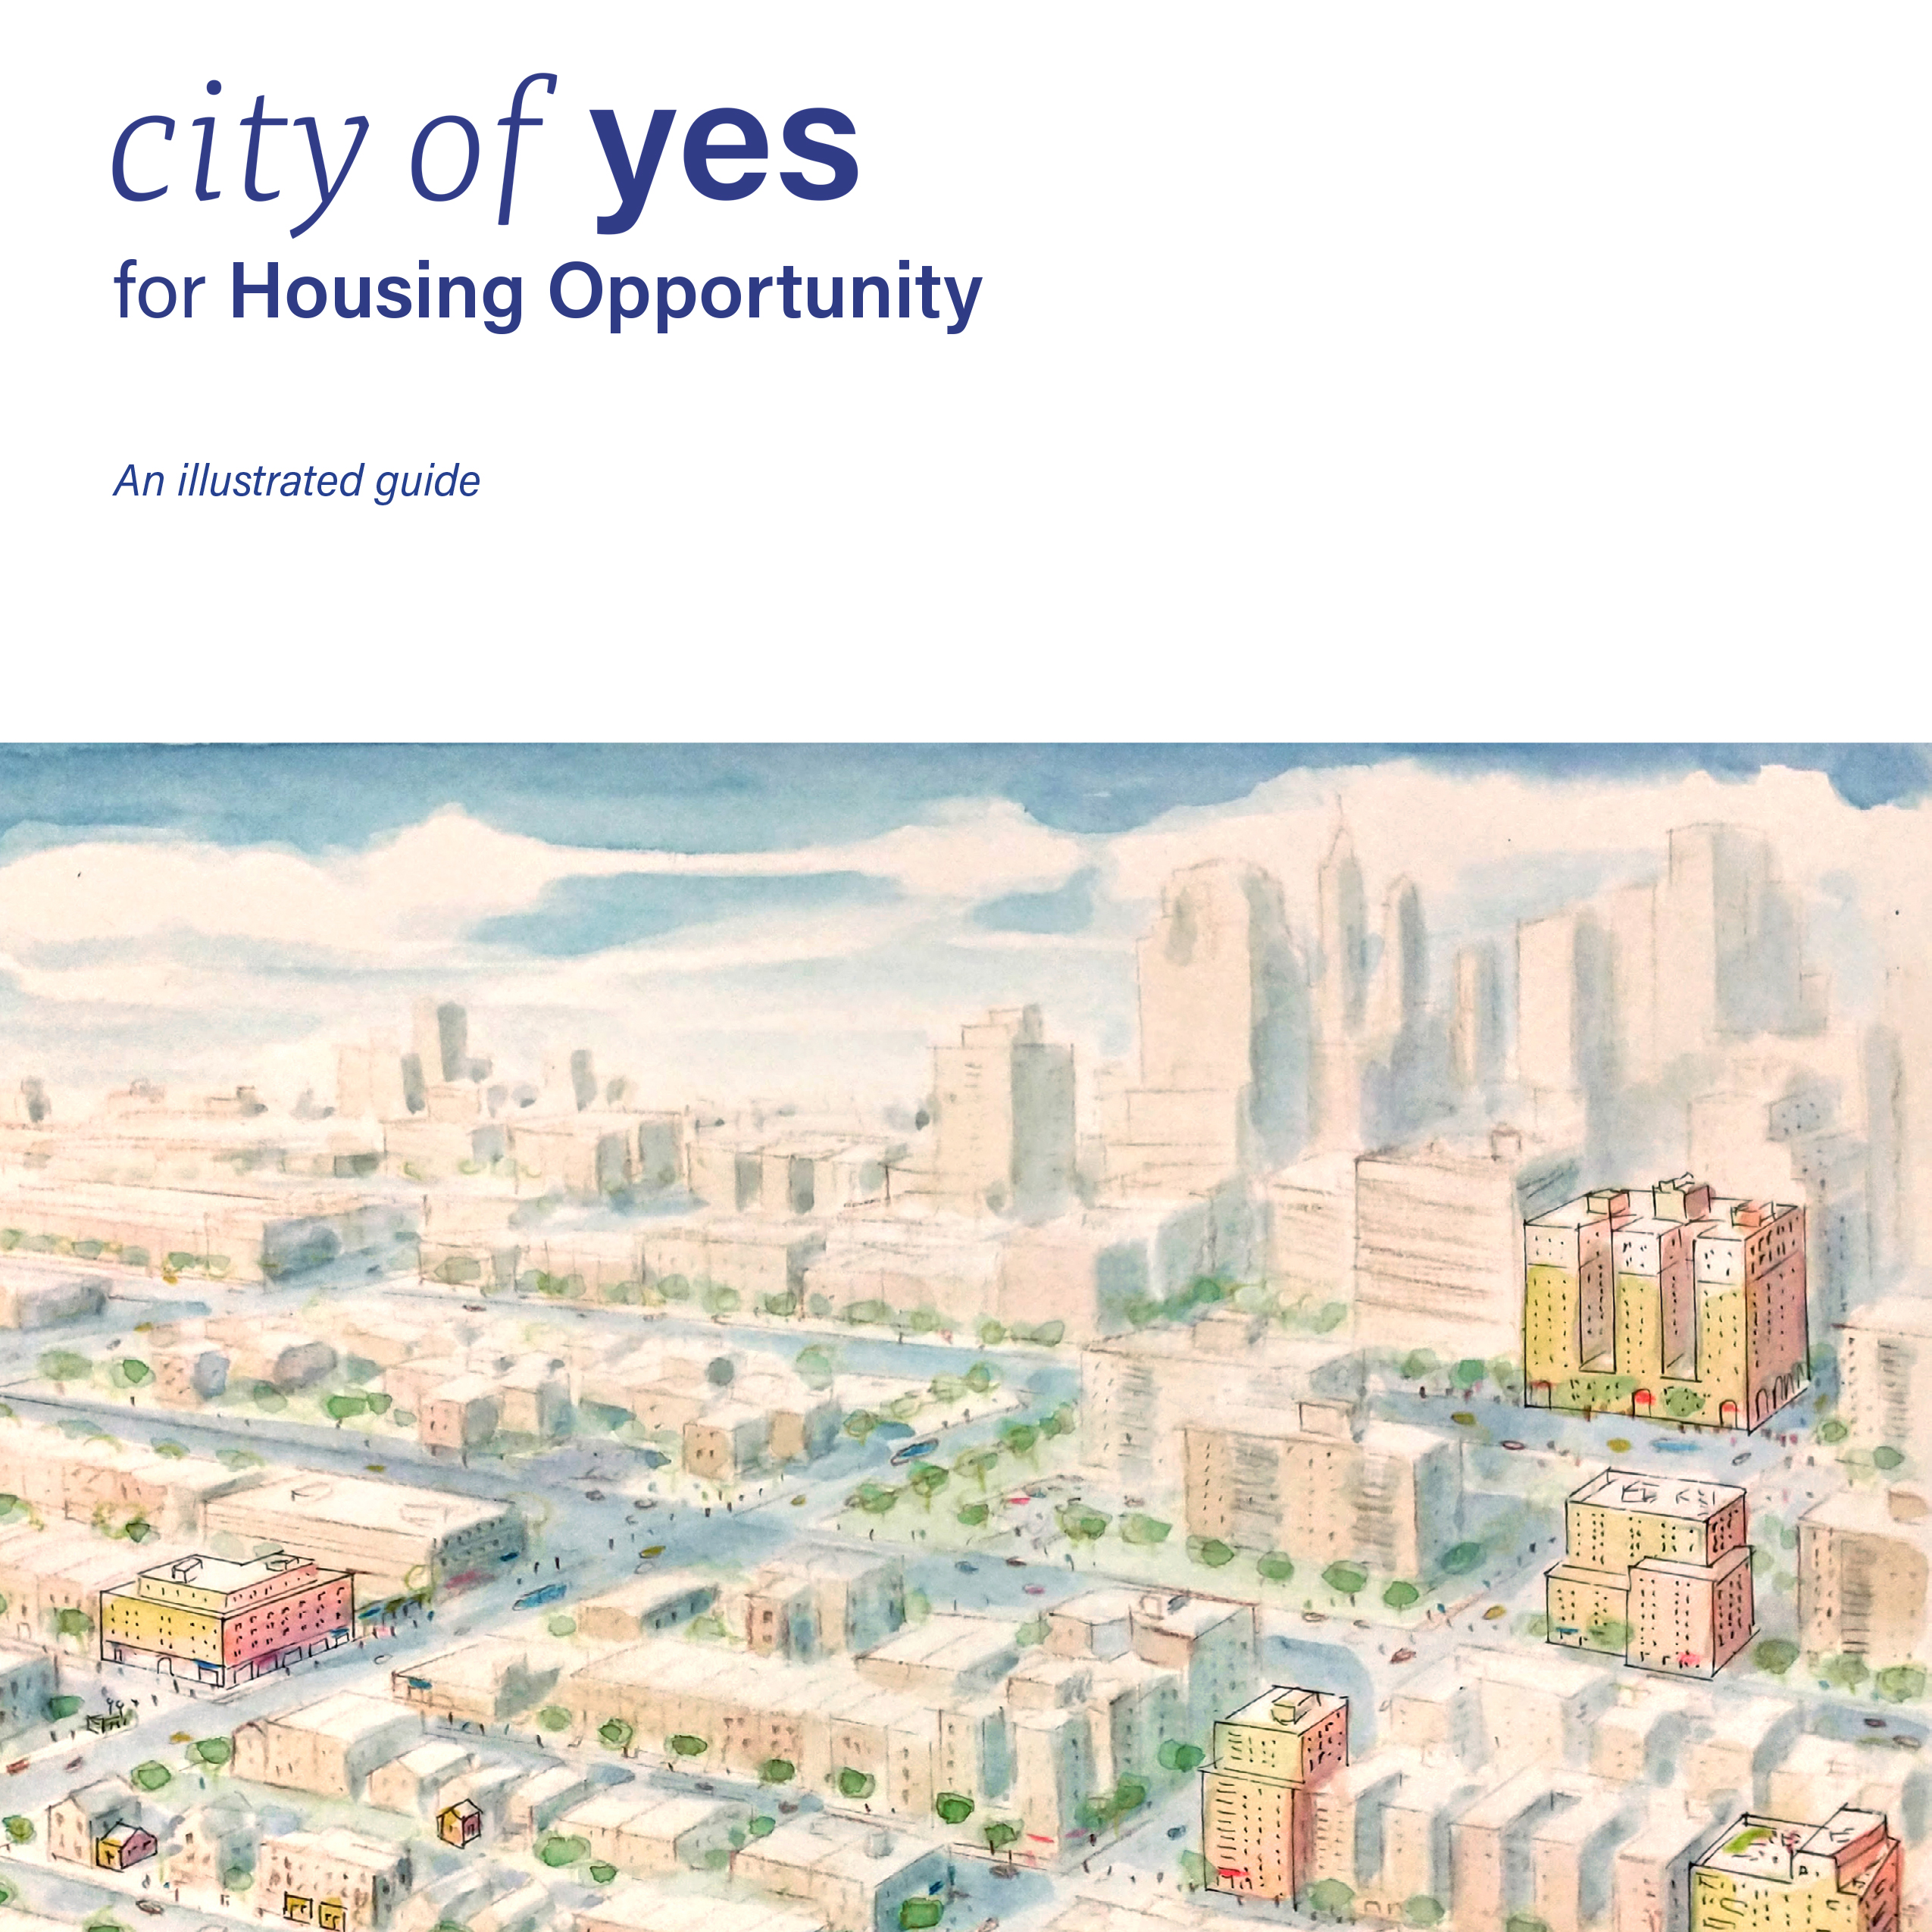 Overview of the Housing Opportunity Proposals